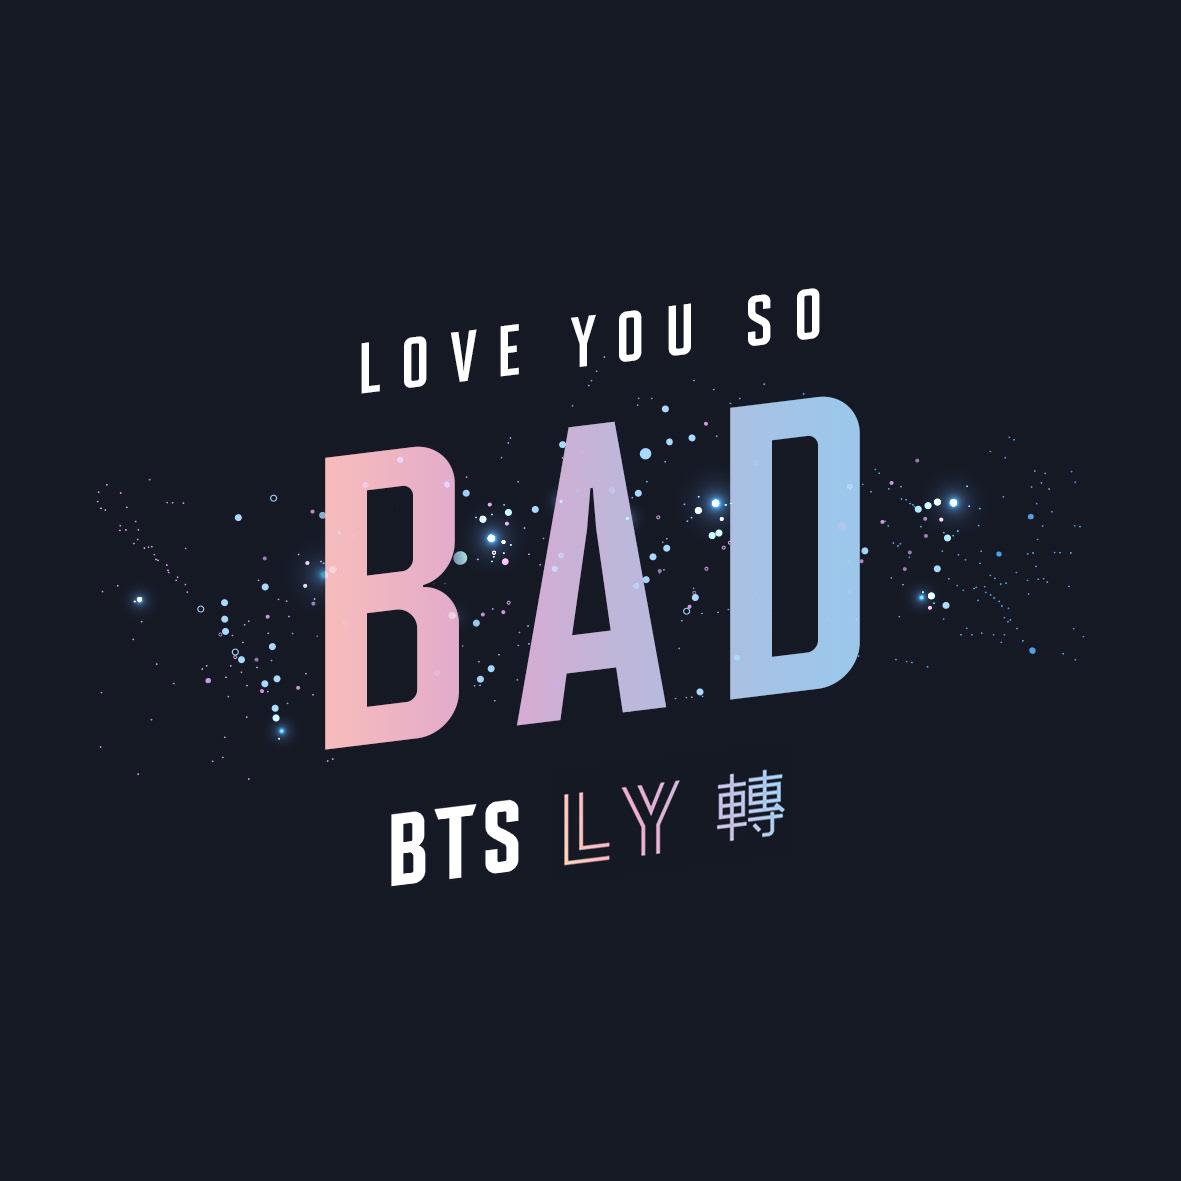 Download Avatars and Header for BTS comeback